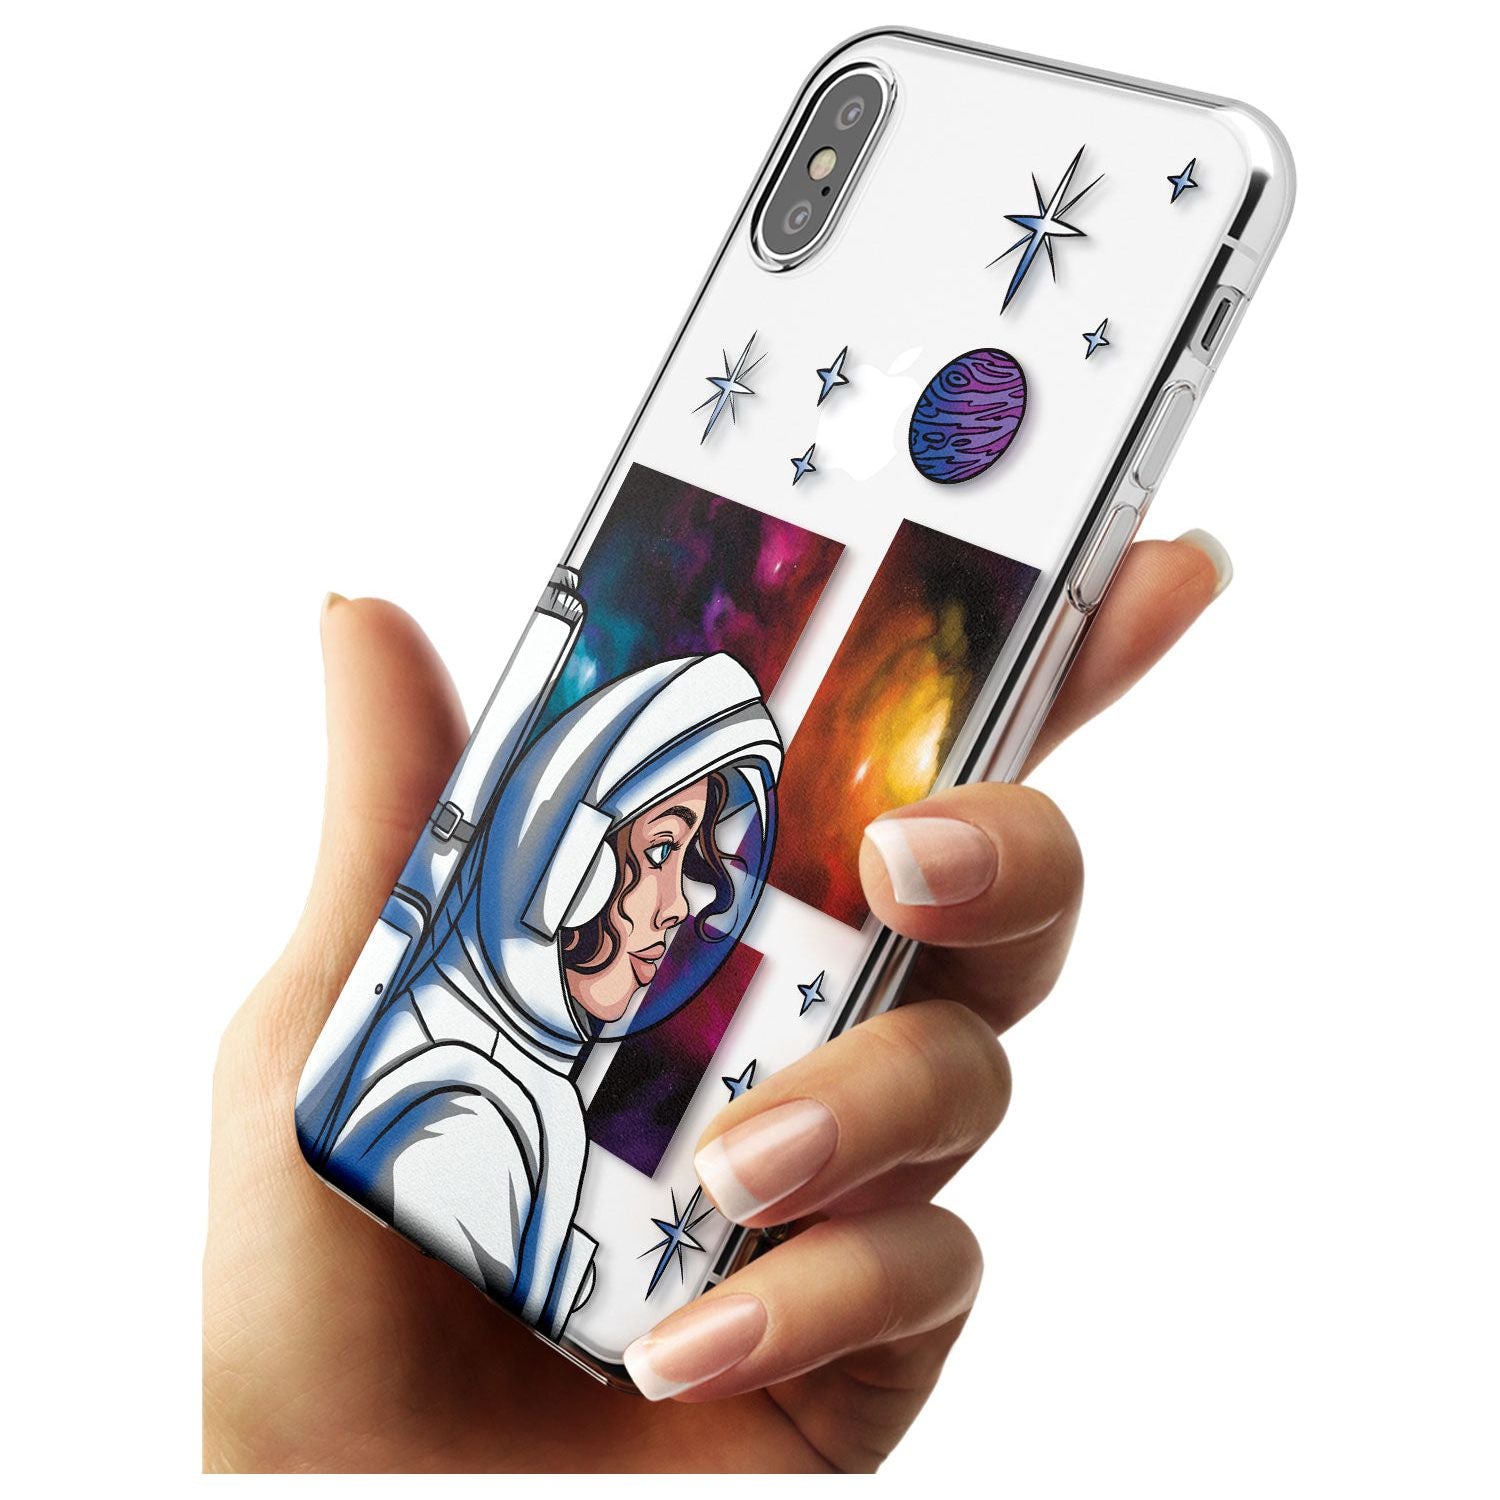 COSMIC AMBITION Black Impact Phone Case for iPhone X XS Max XR